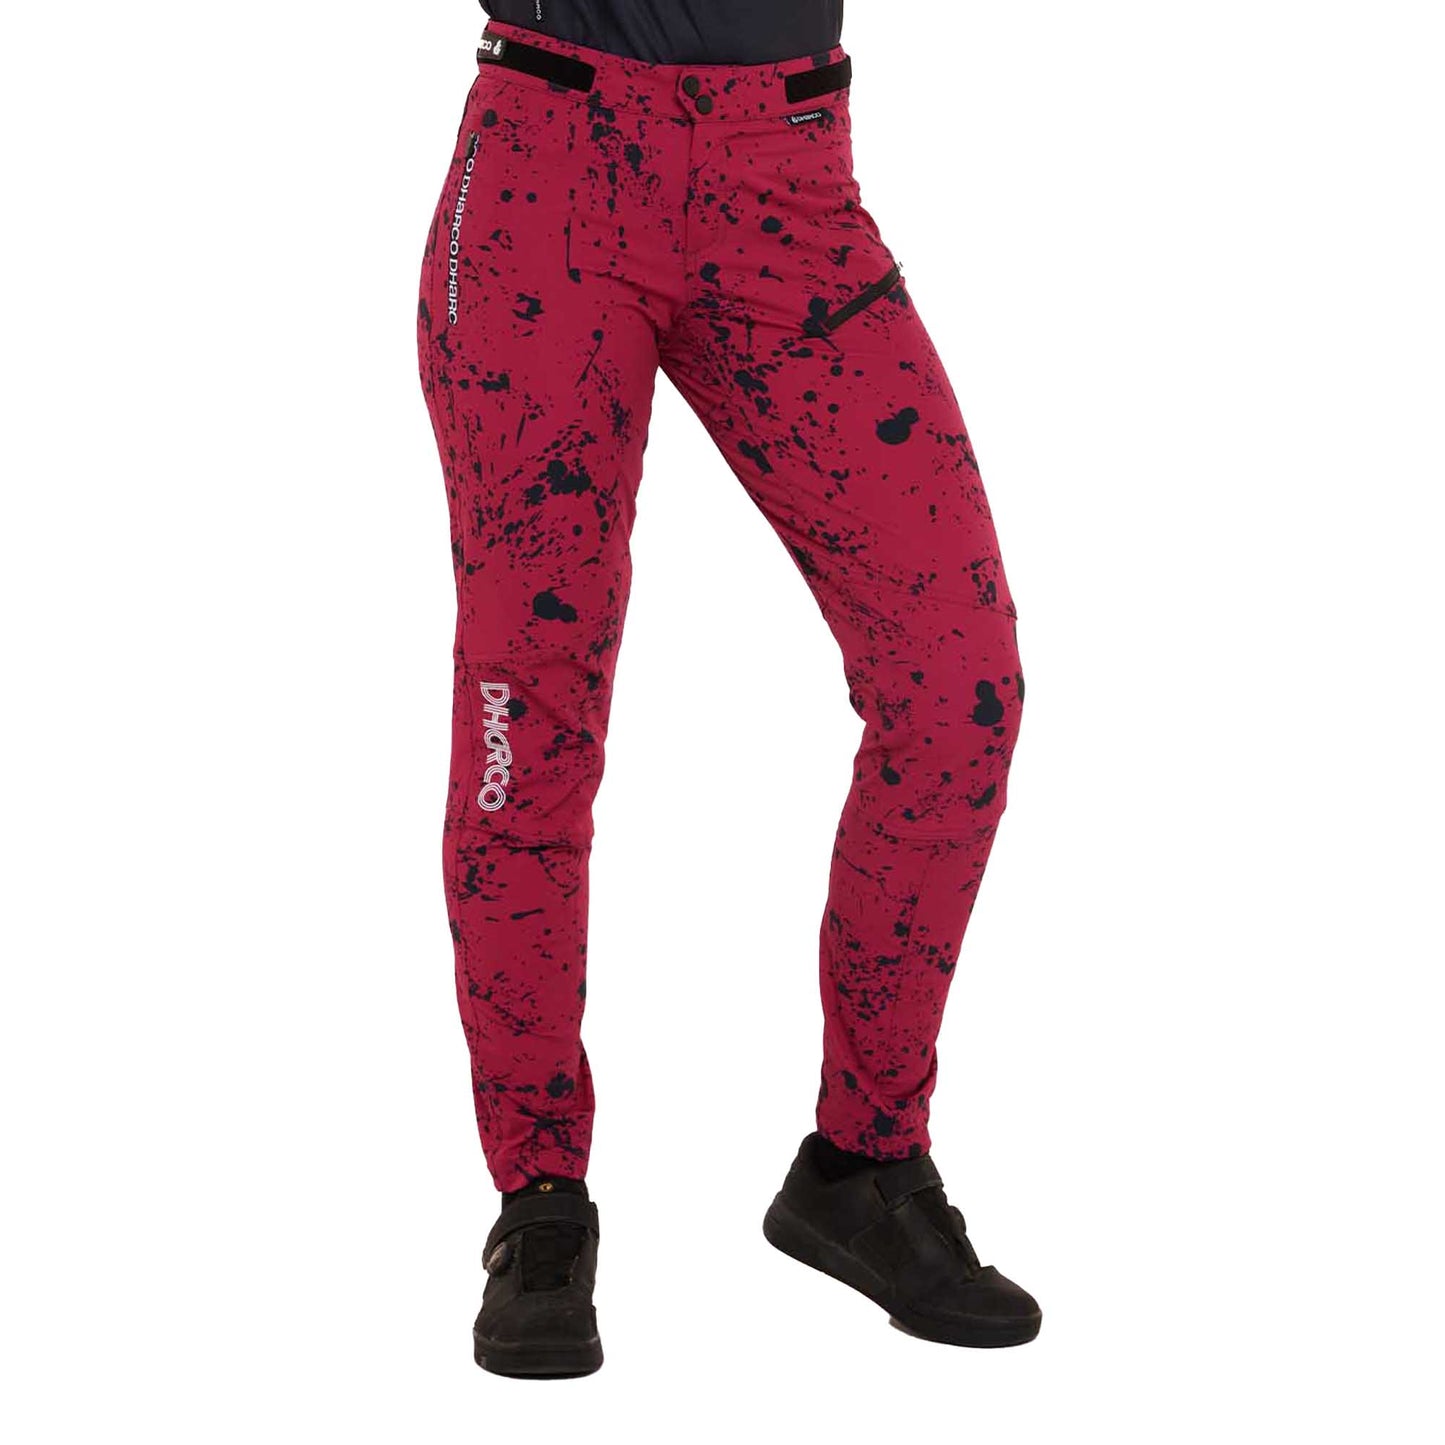 DHaRCO Women's Gravity Pants - Women's L - Chili Peppers